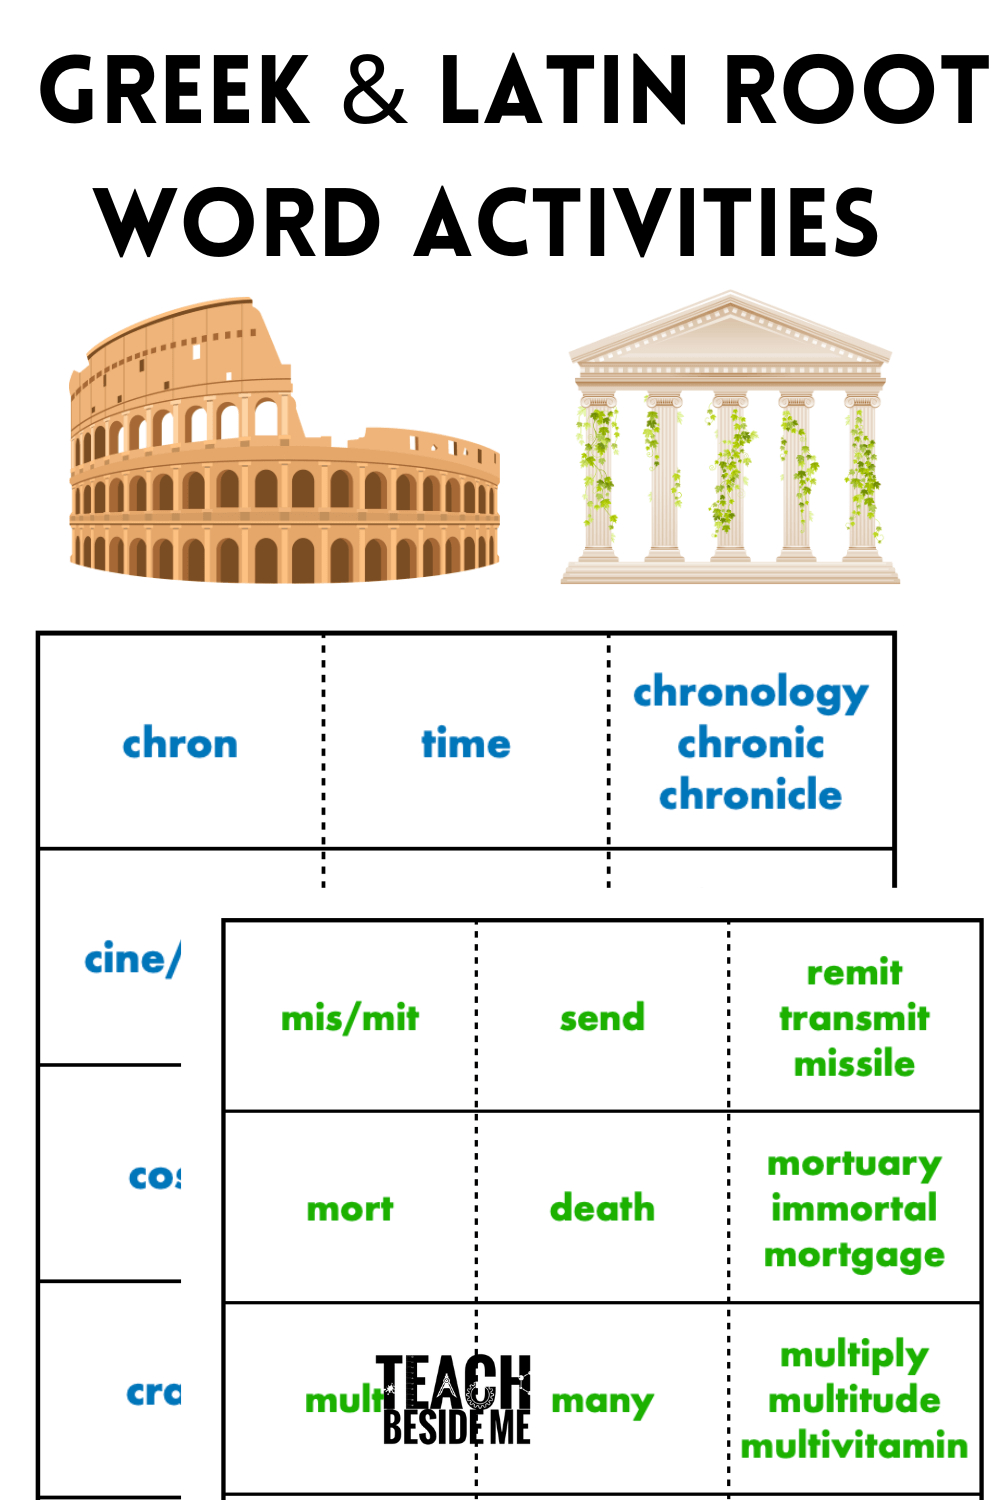 Greek And Latin Roots Worksheets And Activities - Teach Beside Me for Free Printable Greek and Latin Roots